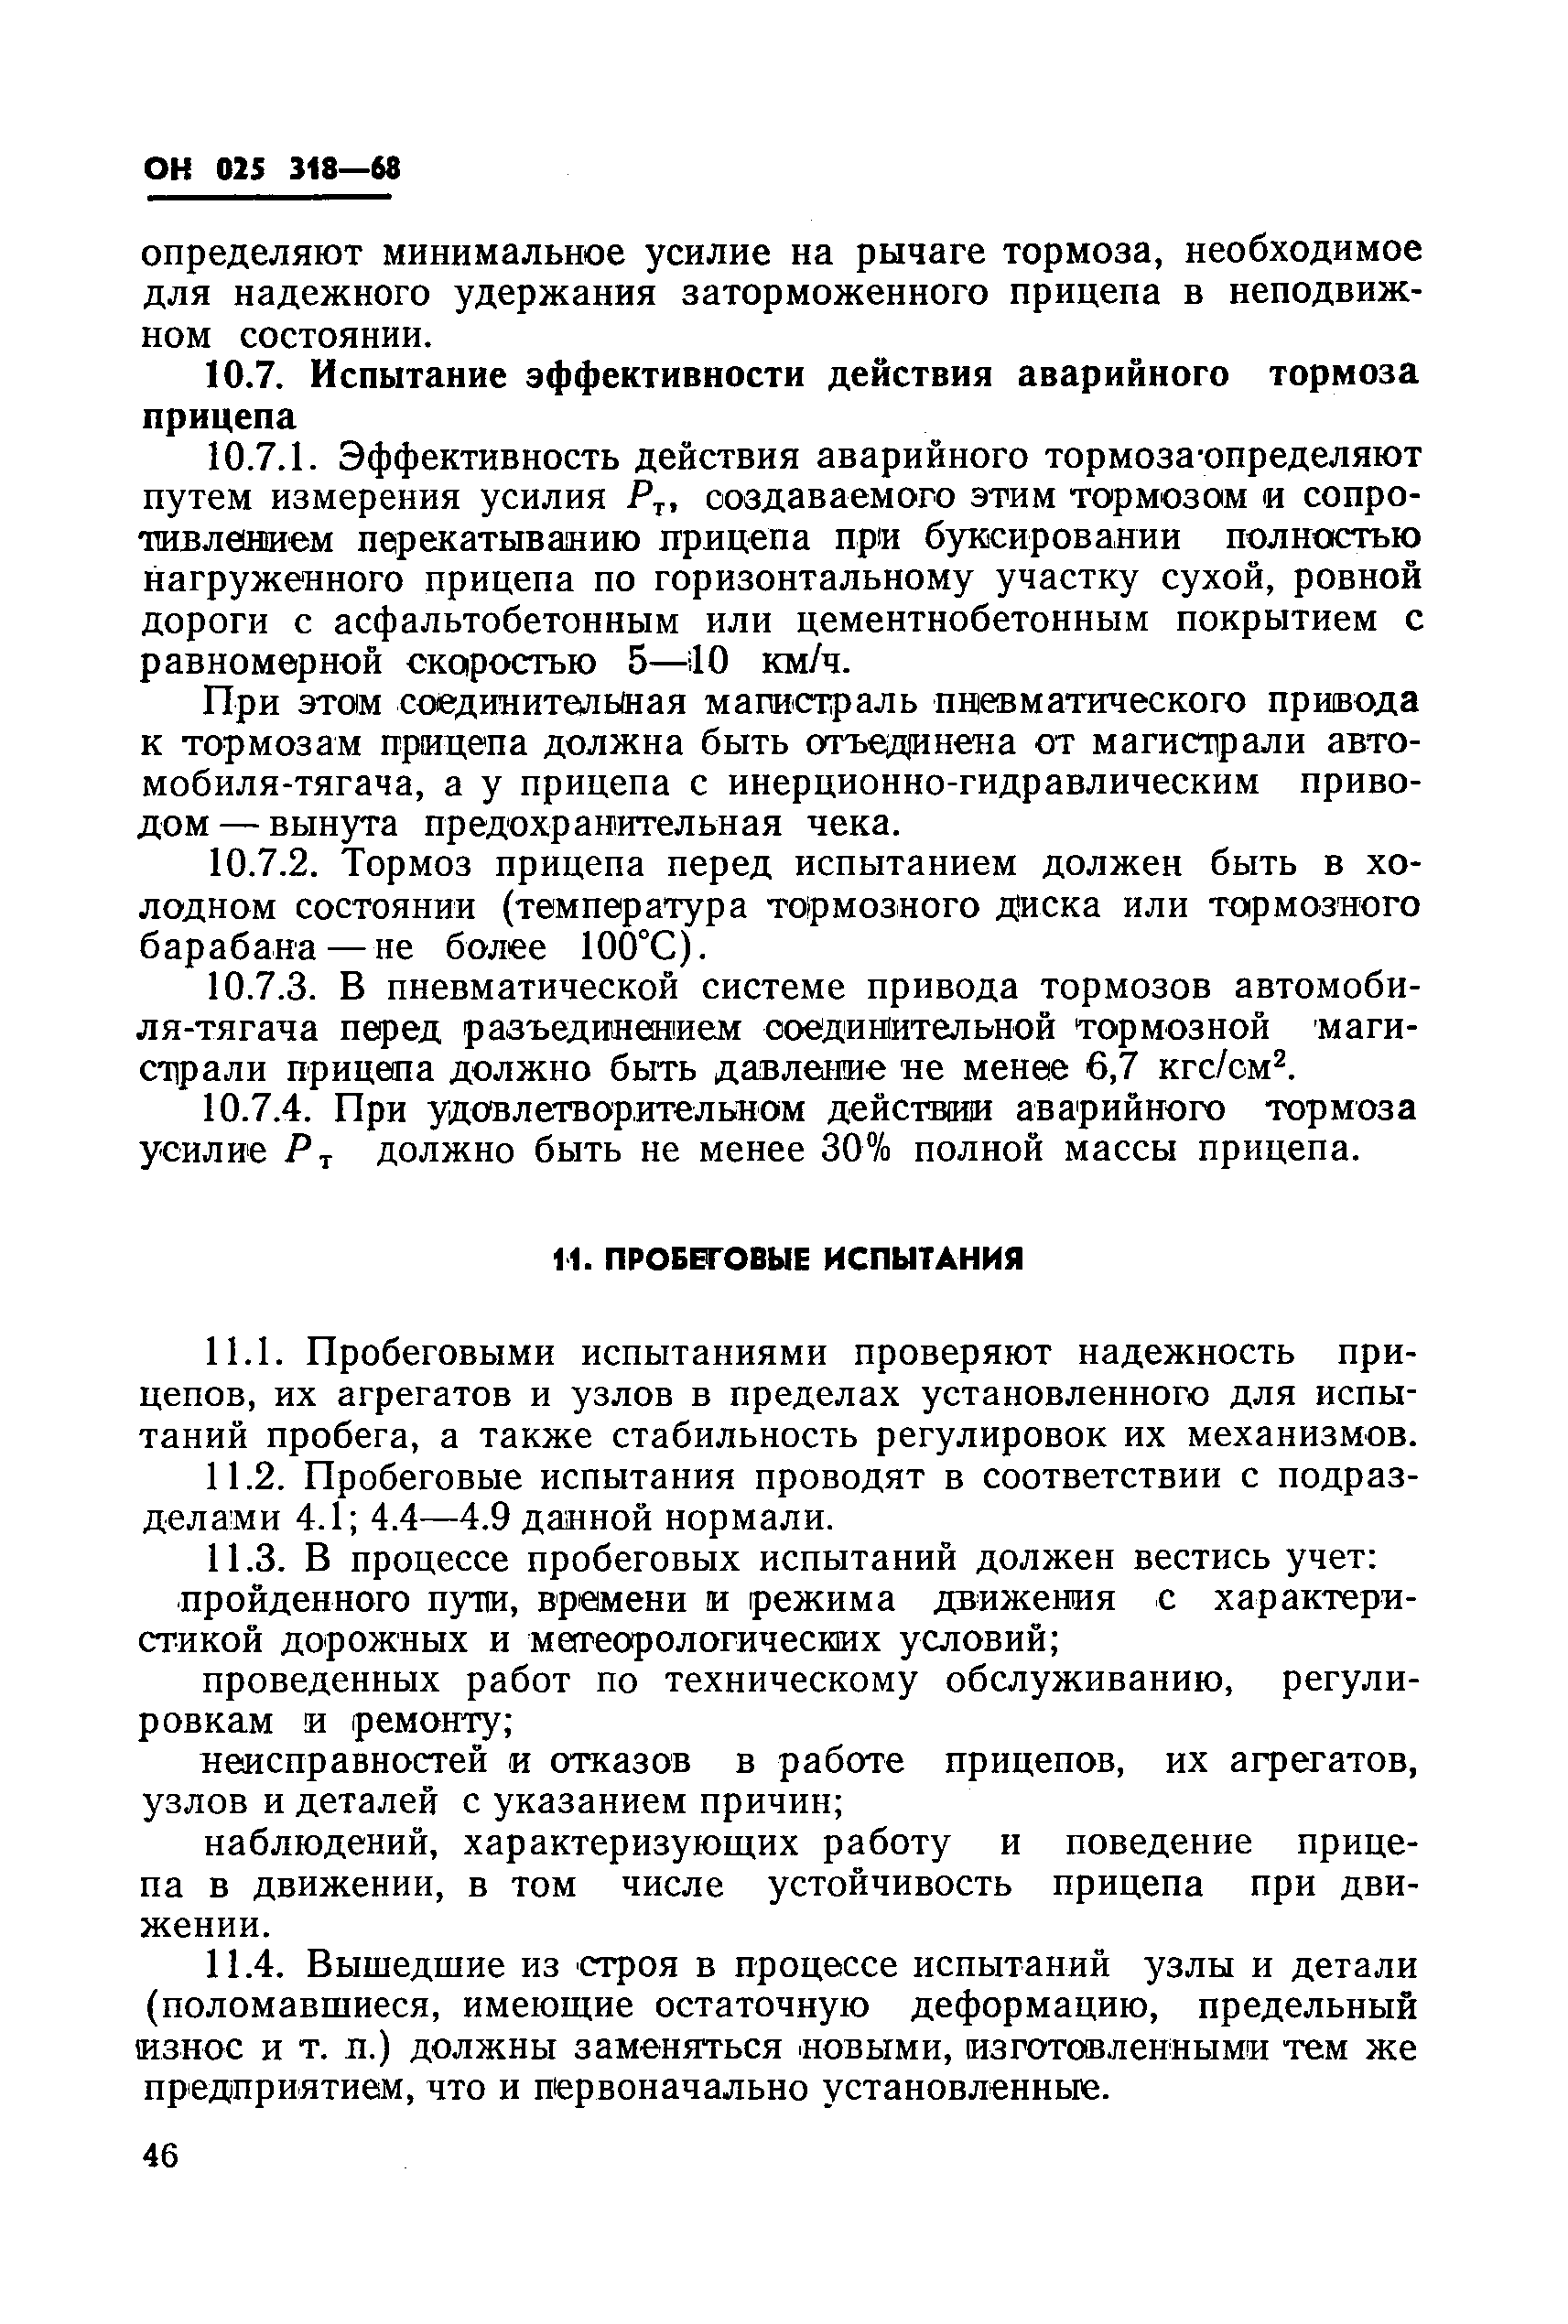 ОН 025 318-68